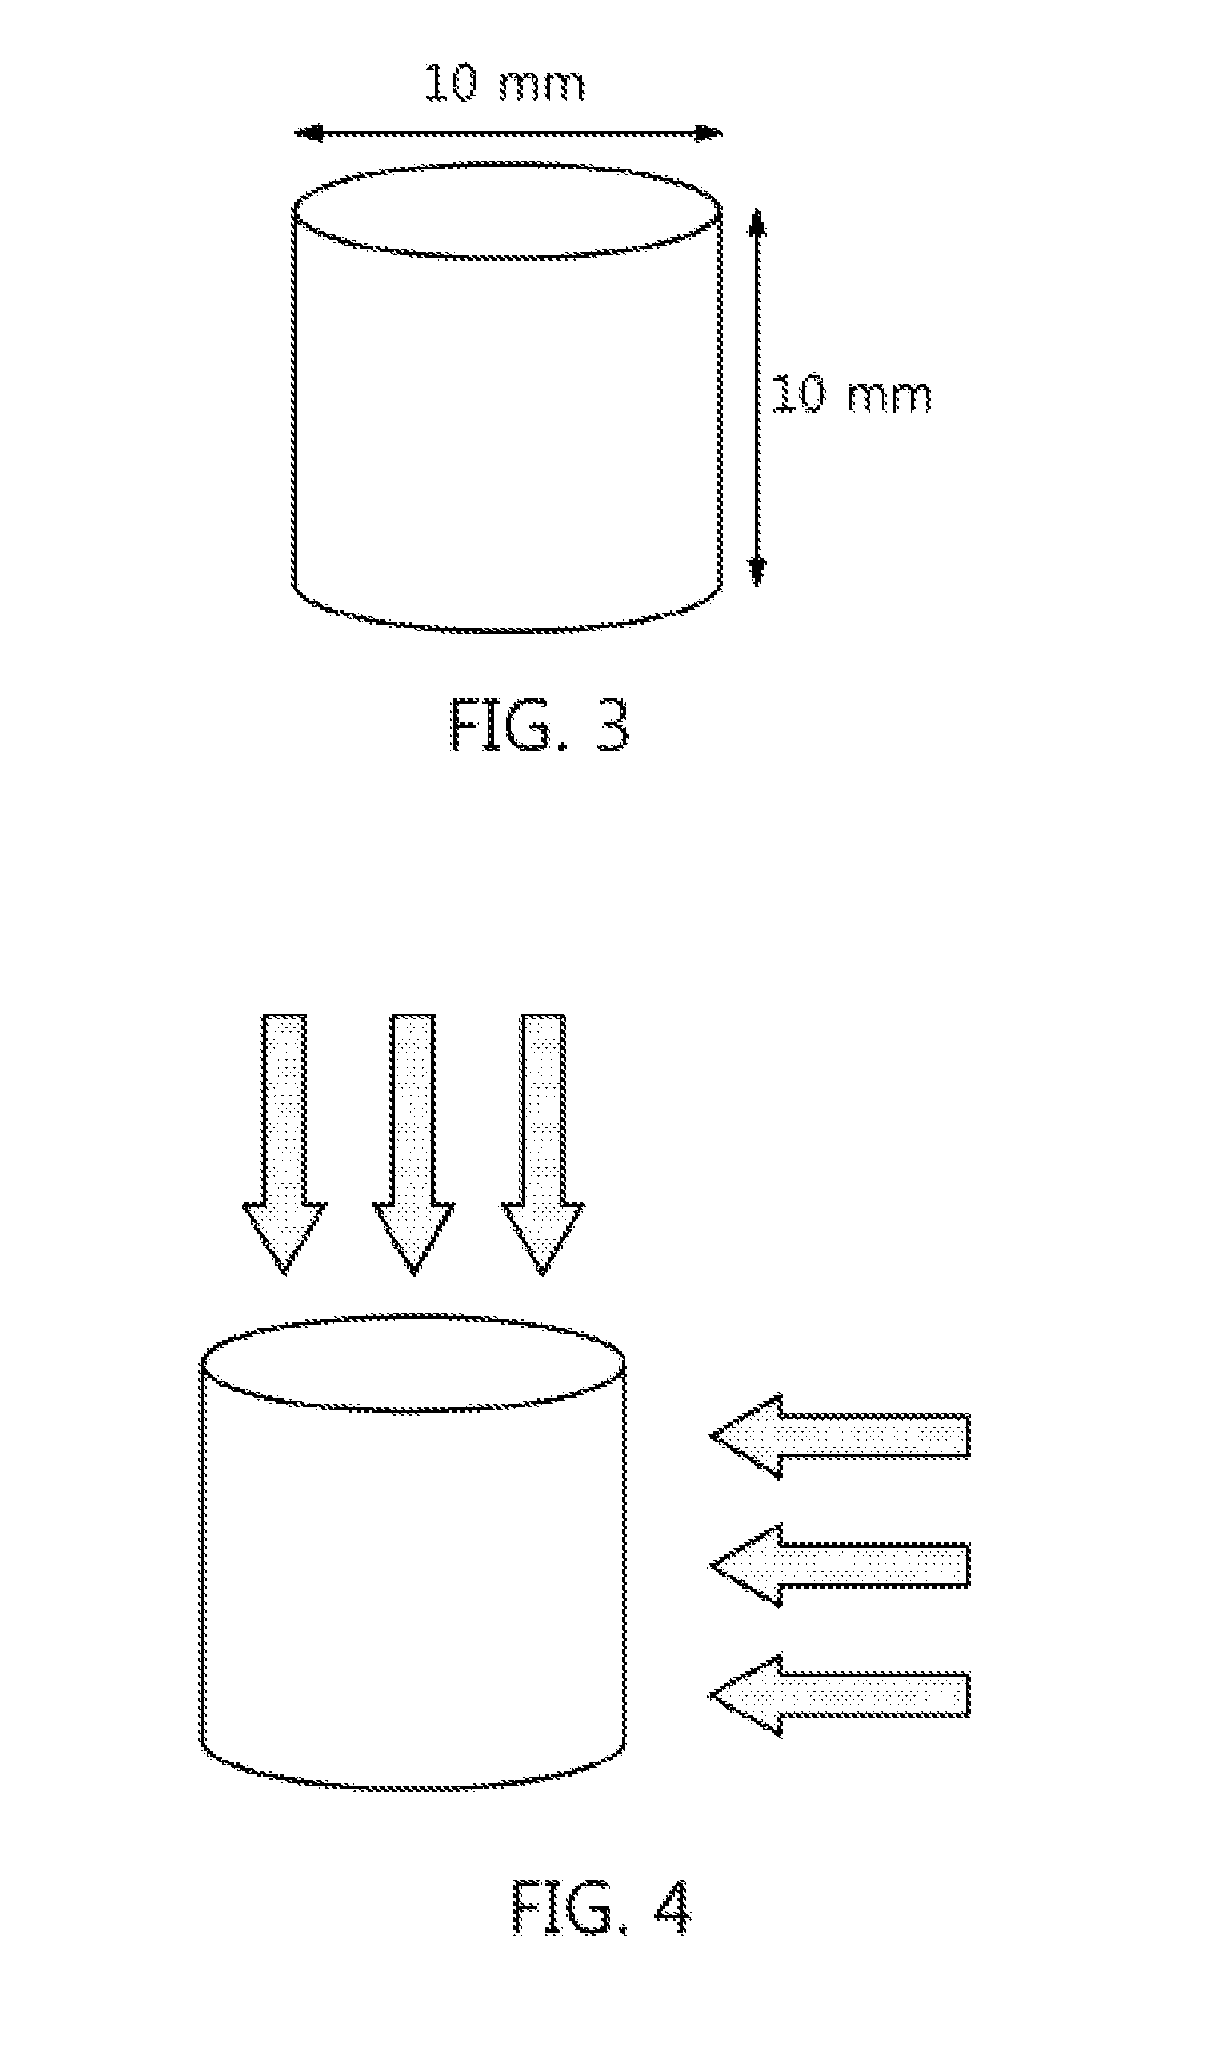 Magnetite-based sintered ore and method of producing same